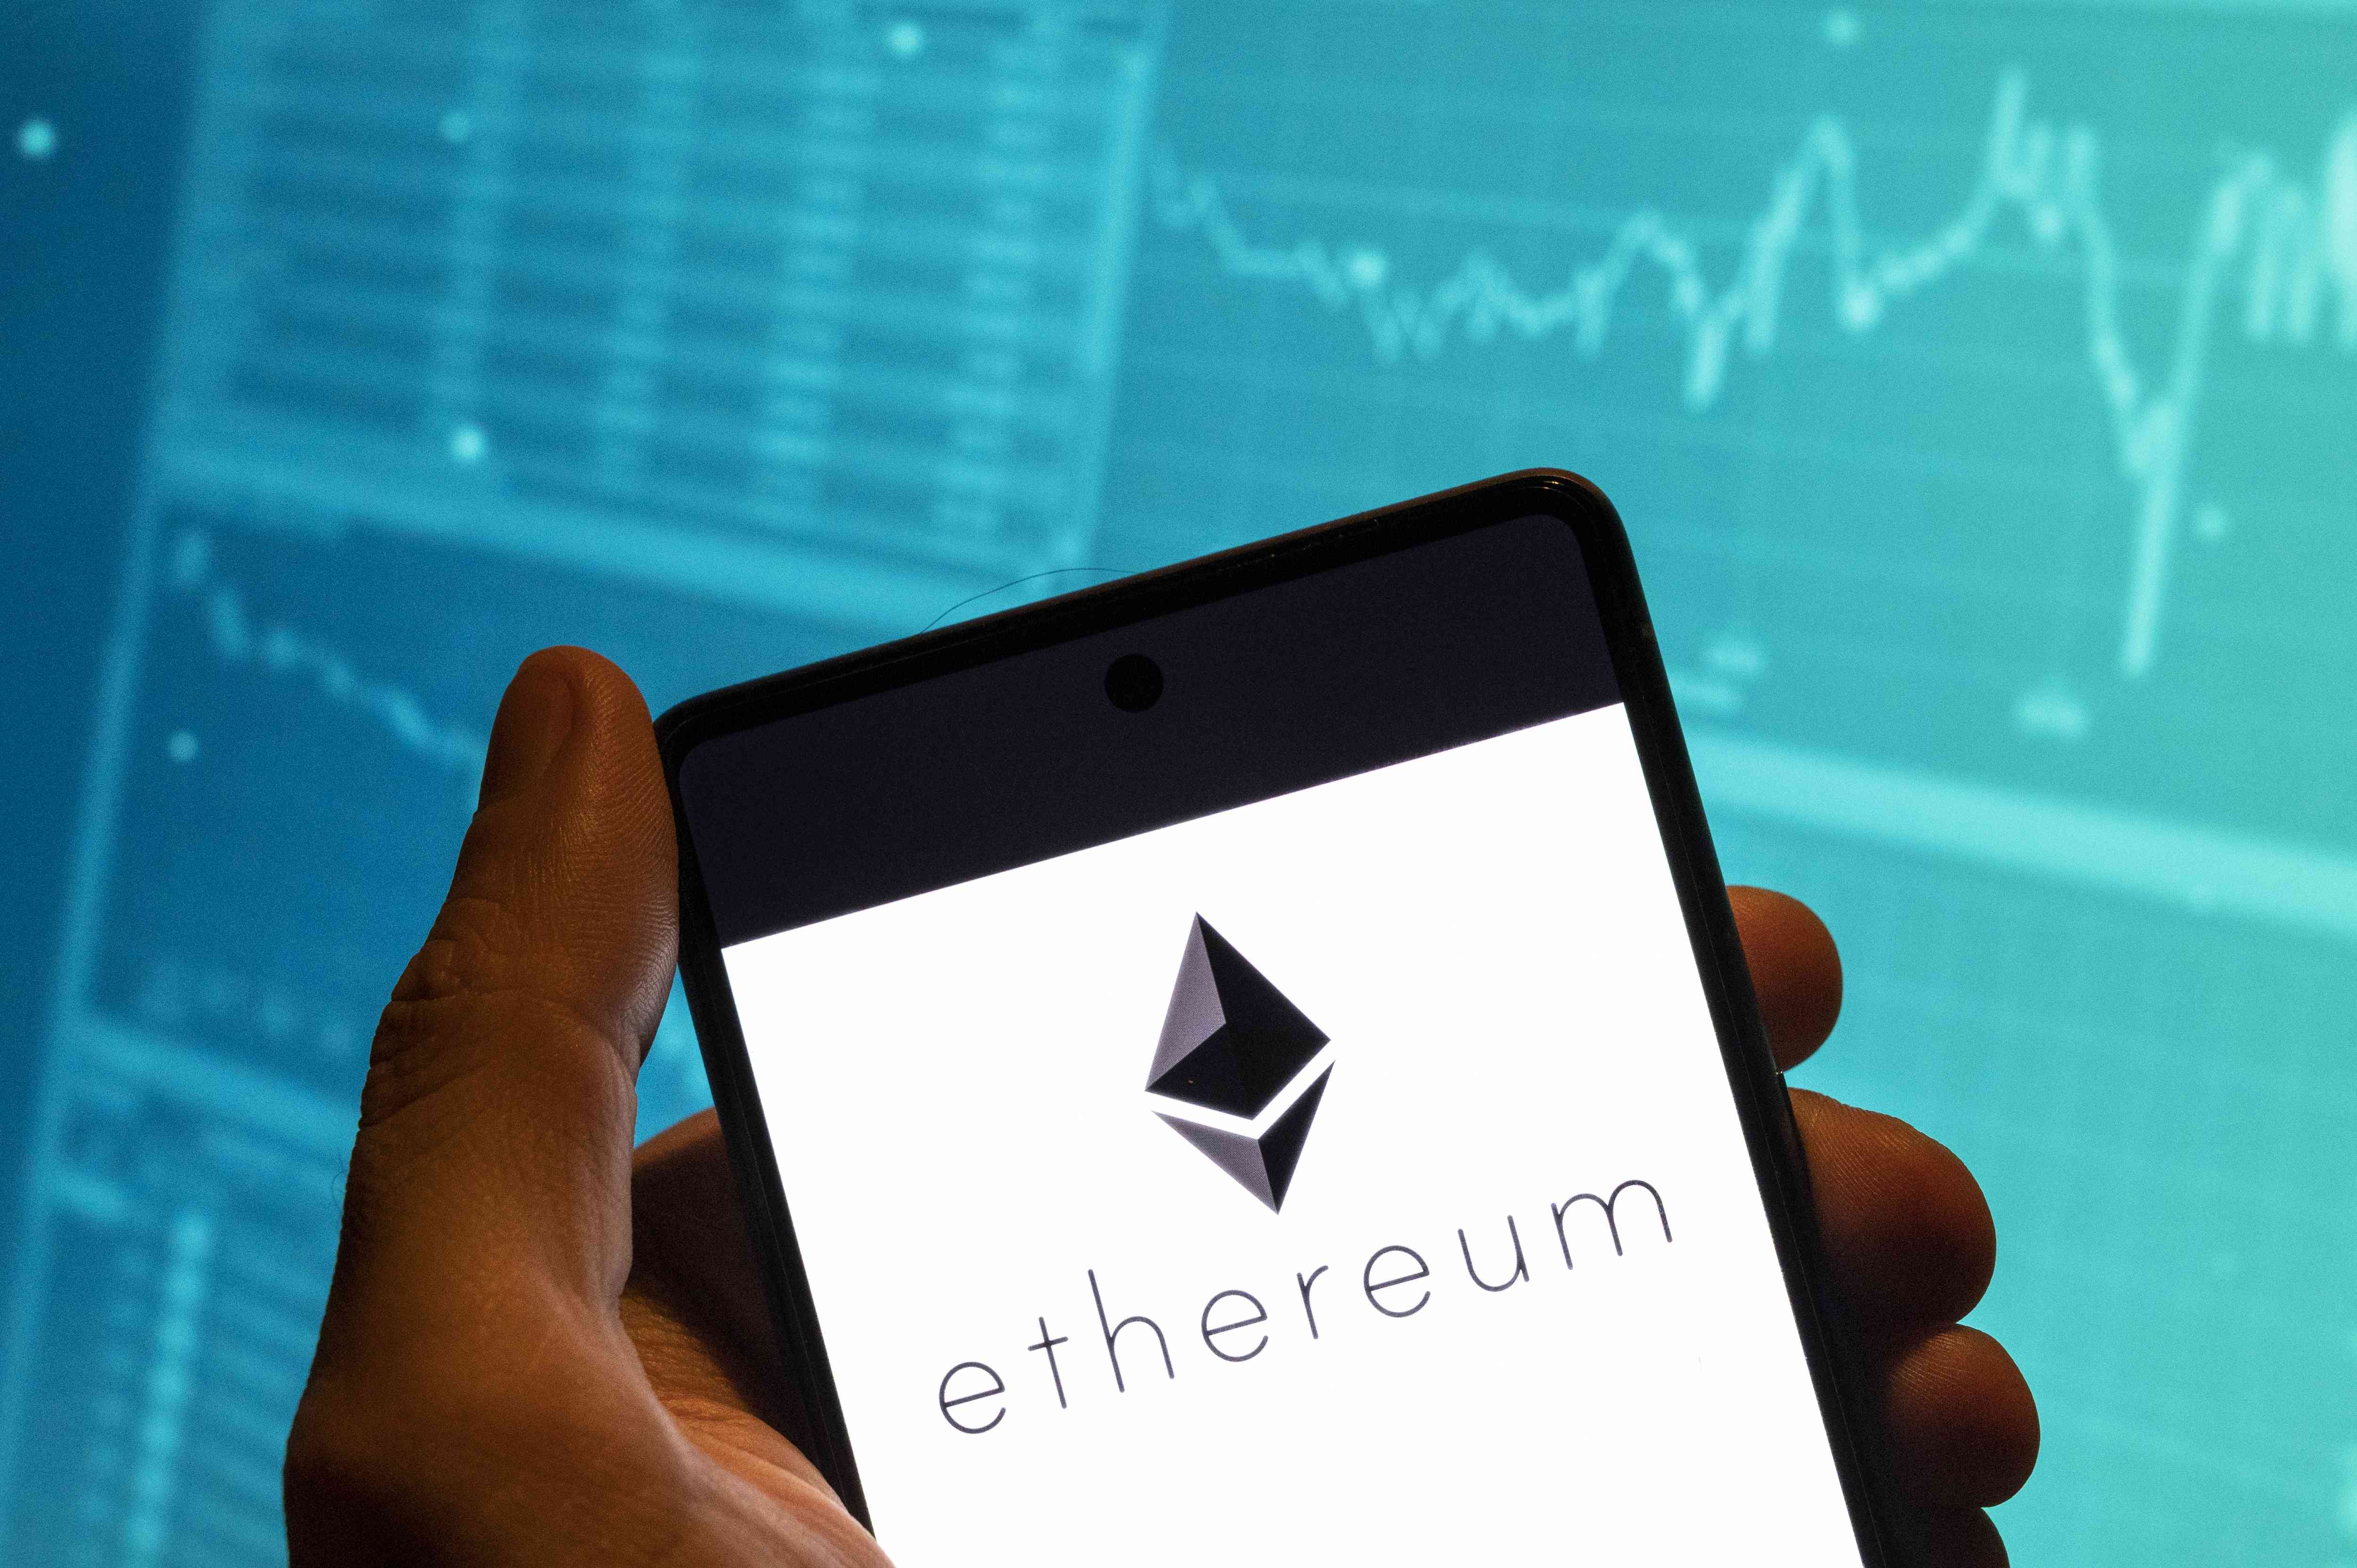 Ethereum displayed on a mobile phone in someone's hand. 